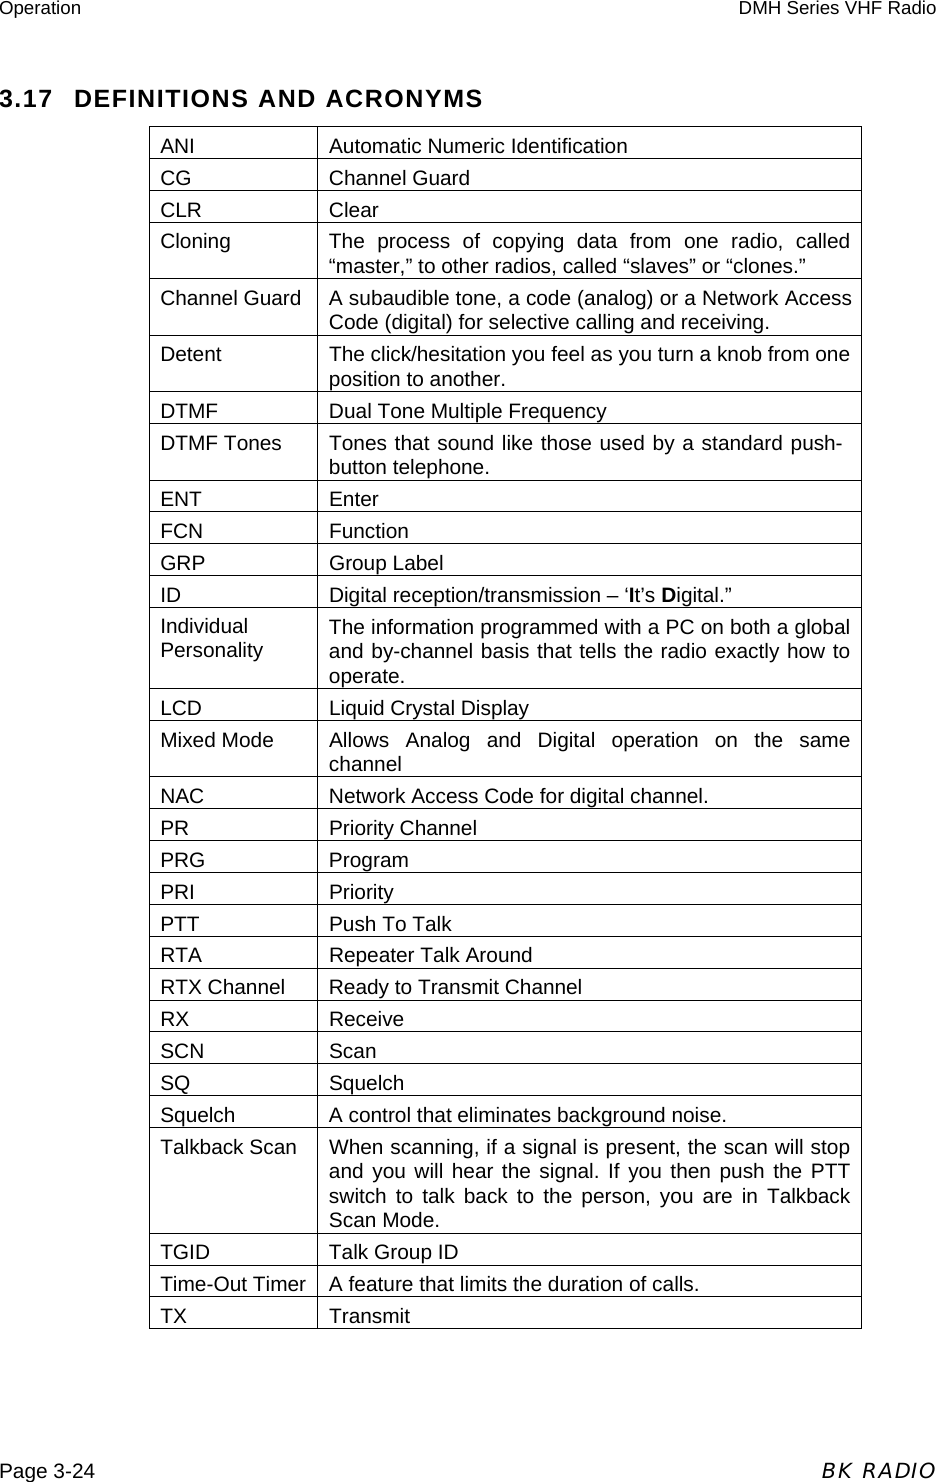 Operation  DMH Series VHF Radio  Page 3-24  BK RADIO 3.17  DEFINITIONS AND ACRONYMS ANI  Automatic Numeric Identification CG Channel Guard CLR Clear Cloning  The process of copying data from one radio, called “master,” to other radios, called “slaves” or “clones.” Channel Guard  A subaudible tone, a code (analog) or a Network Access Code (digital) for selective calling and receiving. Detent  The click/hesitation you feel as you turn a knob from one position to another. DTMF  Dual Tone Multiple Frequency DTMF Tones  Tones that sound like those used by a standard push-button telephone. ENT Enter FCN Function GRP Group Label ID  Digital reception/transmission – ‘It’s Digital.” Individual Personality  The information programmed with a PC on both a global and by-channel basis that tells the radio exactly how to operate. LCD Liquid Crystal Display Mixed Mode  Allows Analog and Digital operation on the same channel NAC  Network Access Code for digital channel. PR Priority Channel PRG Program PRI Priority  PTT  Push To Talk RTA  Repeater Talk Around RTX Channel  Ready to Transmit Channel RX Receive SCN Scan SQ Squelch Squelch  A control that eliminates background noise. Talkback Scan  When scanning, if a signal is present, the scan will stop and you will hear the signal. If you then push the PTT switch to talk back to the person, you are in Talkback Scan Mode. TGID  Talk Group ID Time-Out Timer  A feature that limits the duration of calls. TX Transmit  